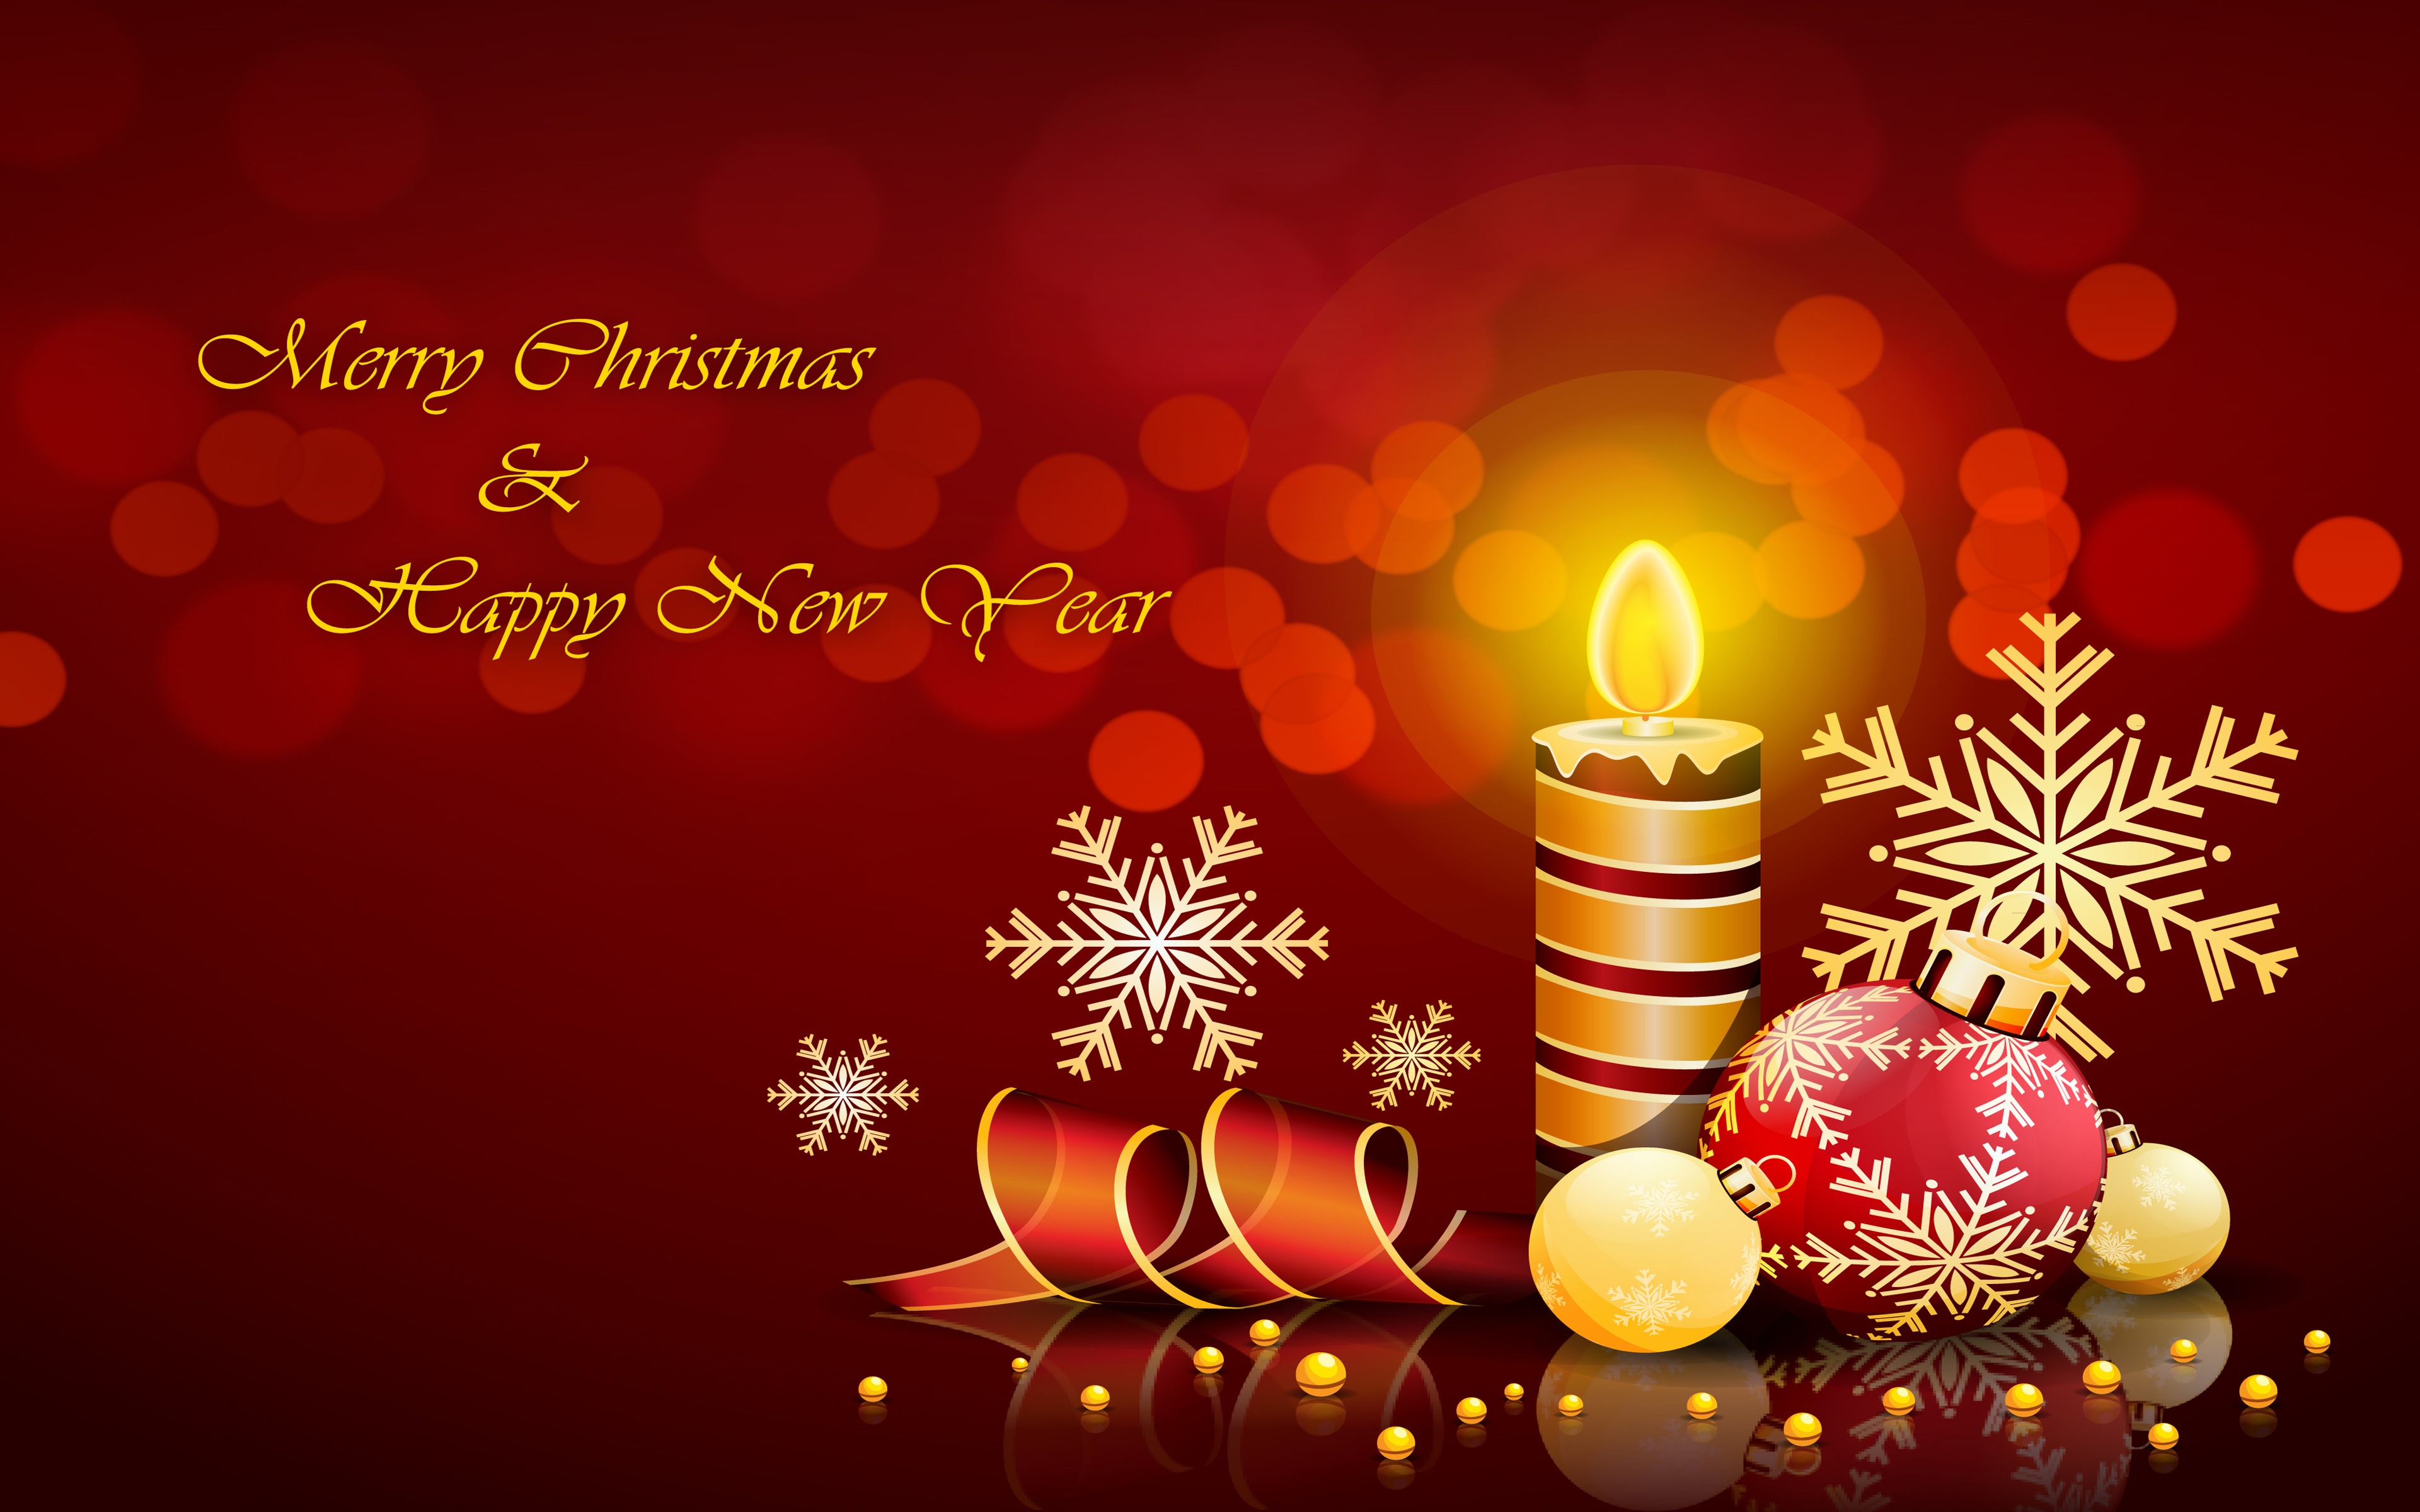 Happy New Year Wishes 2022 Images Free Download - Happy New Year Wishes ...